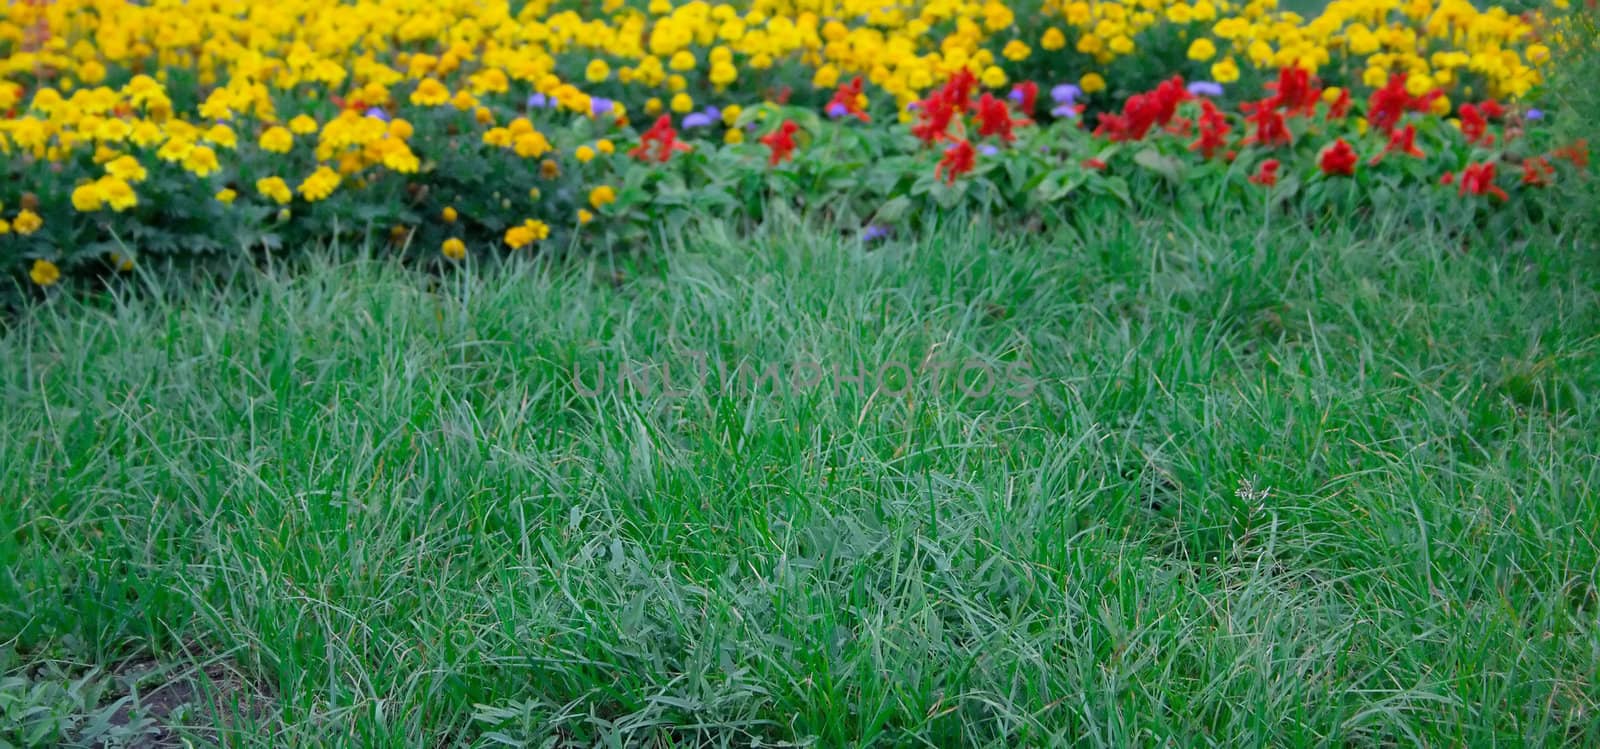 Summer lawn with a green grass and flowers of different color behind